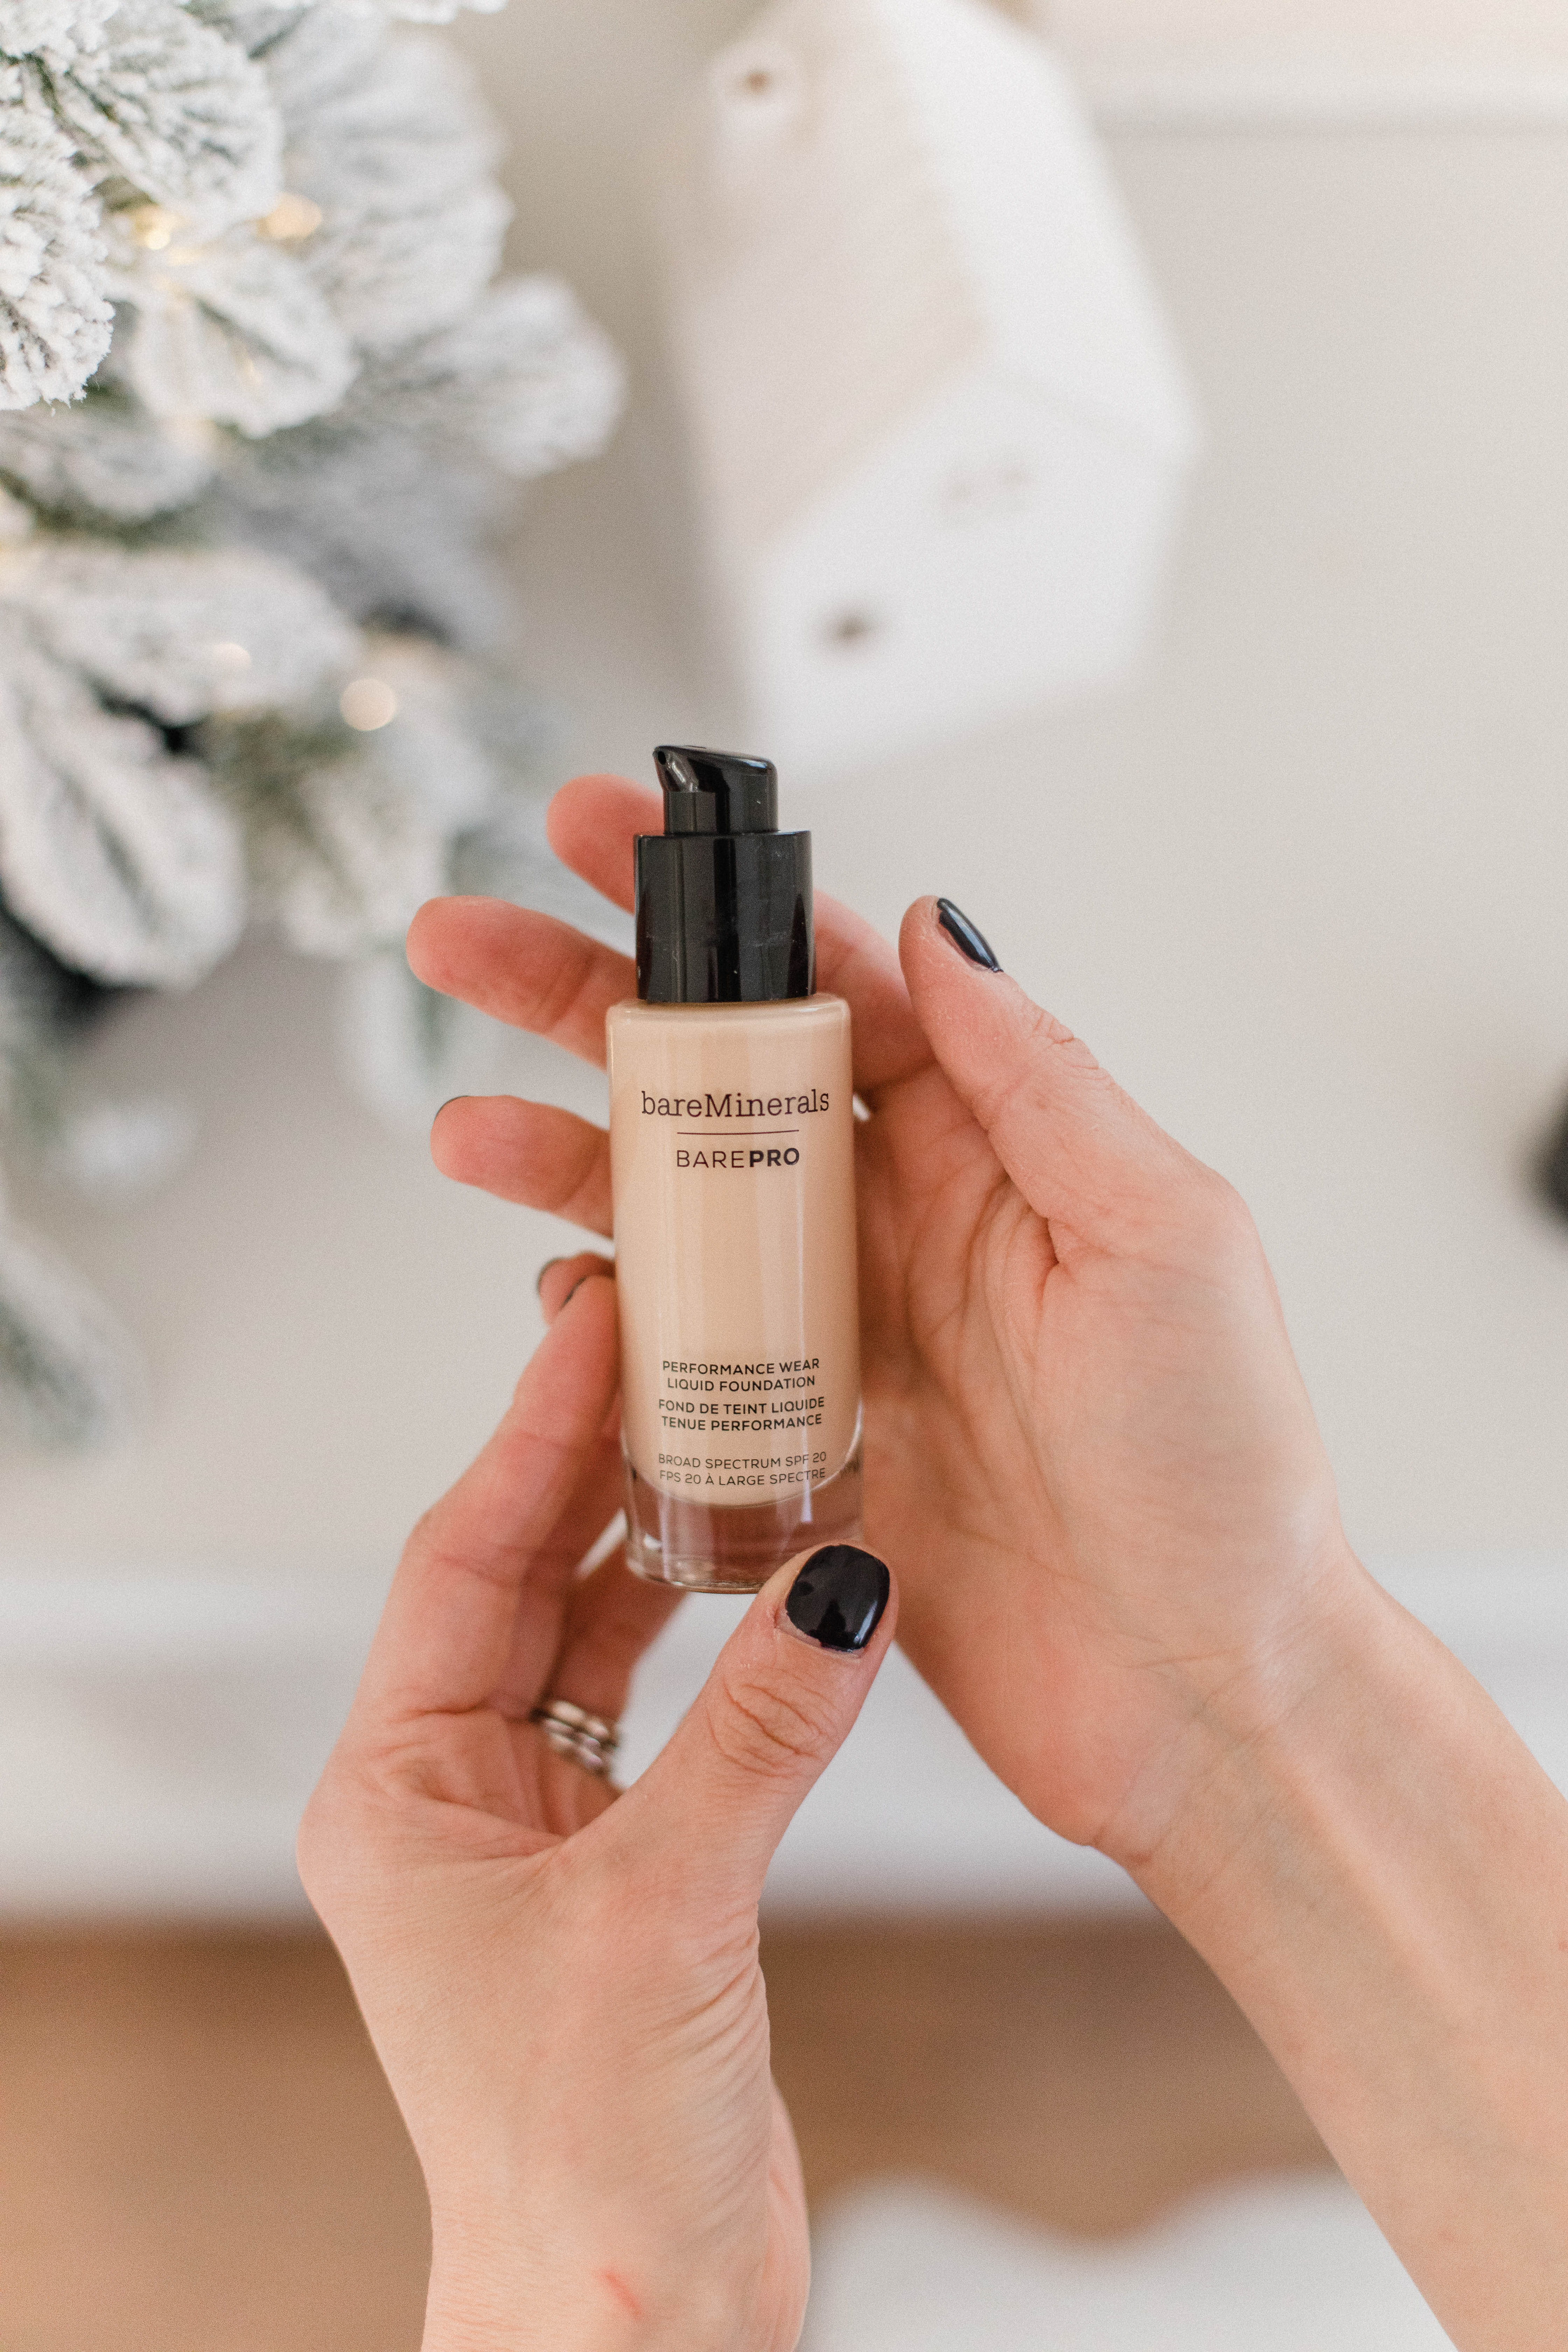 Connecticut life and style blogger Lauren McBride shares her top recommended bareMinerals products now available on QVC, including foundation, blush, and lip products.